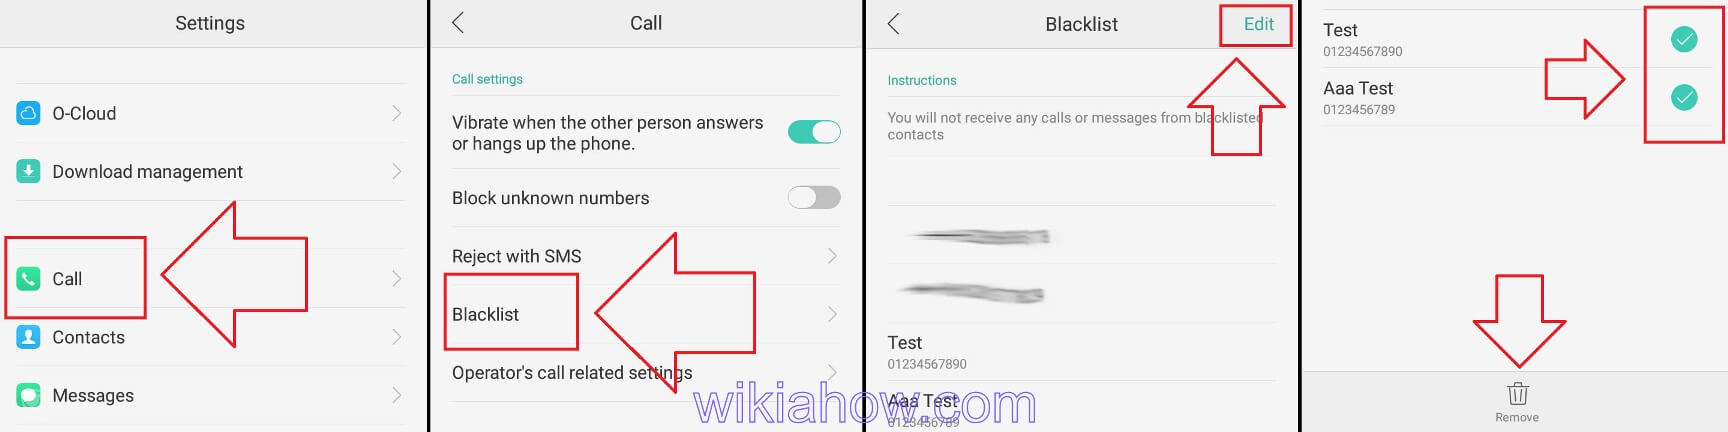 How to unblock a number on android via PHONE SETTING 